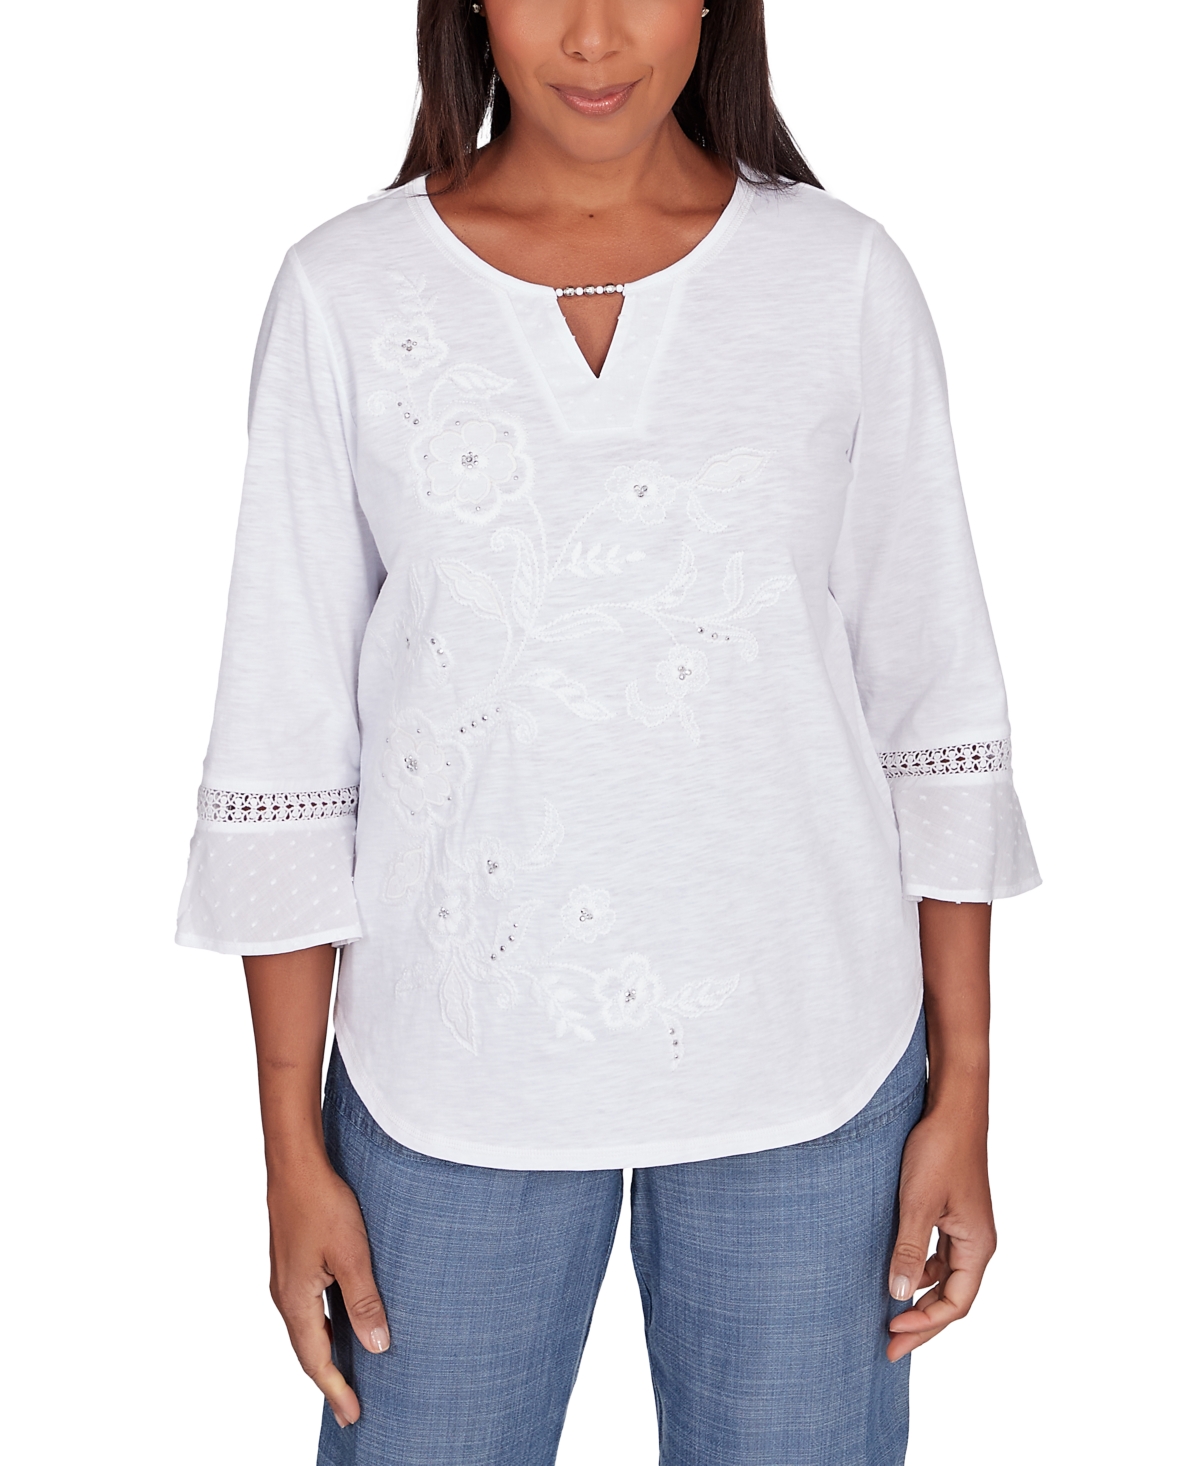 Petite Embroidered Embellished Keyhole Top - White